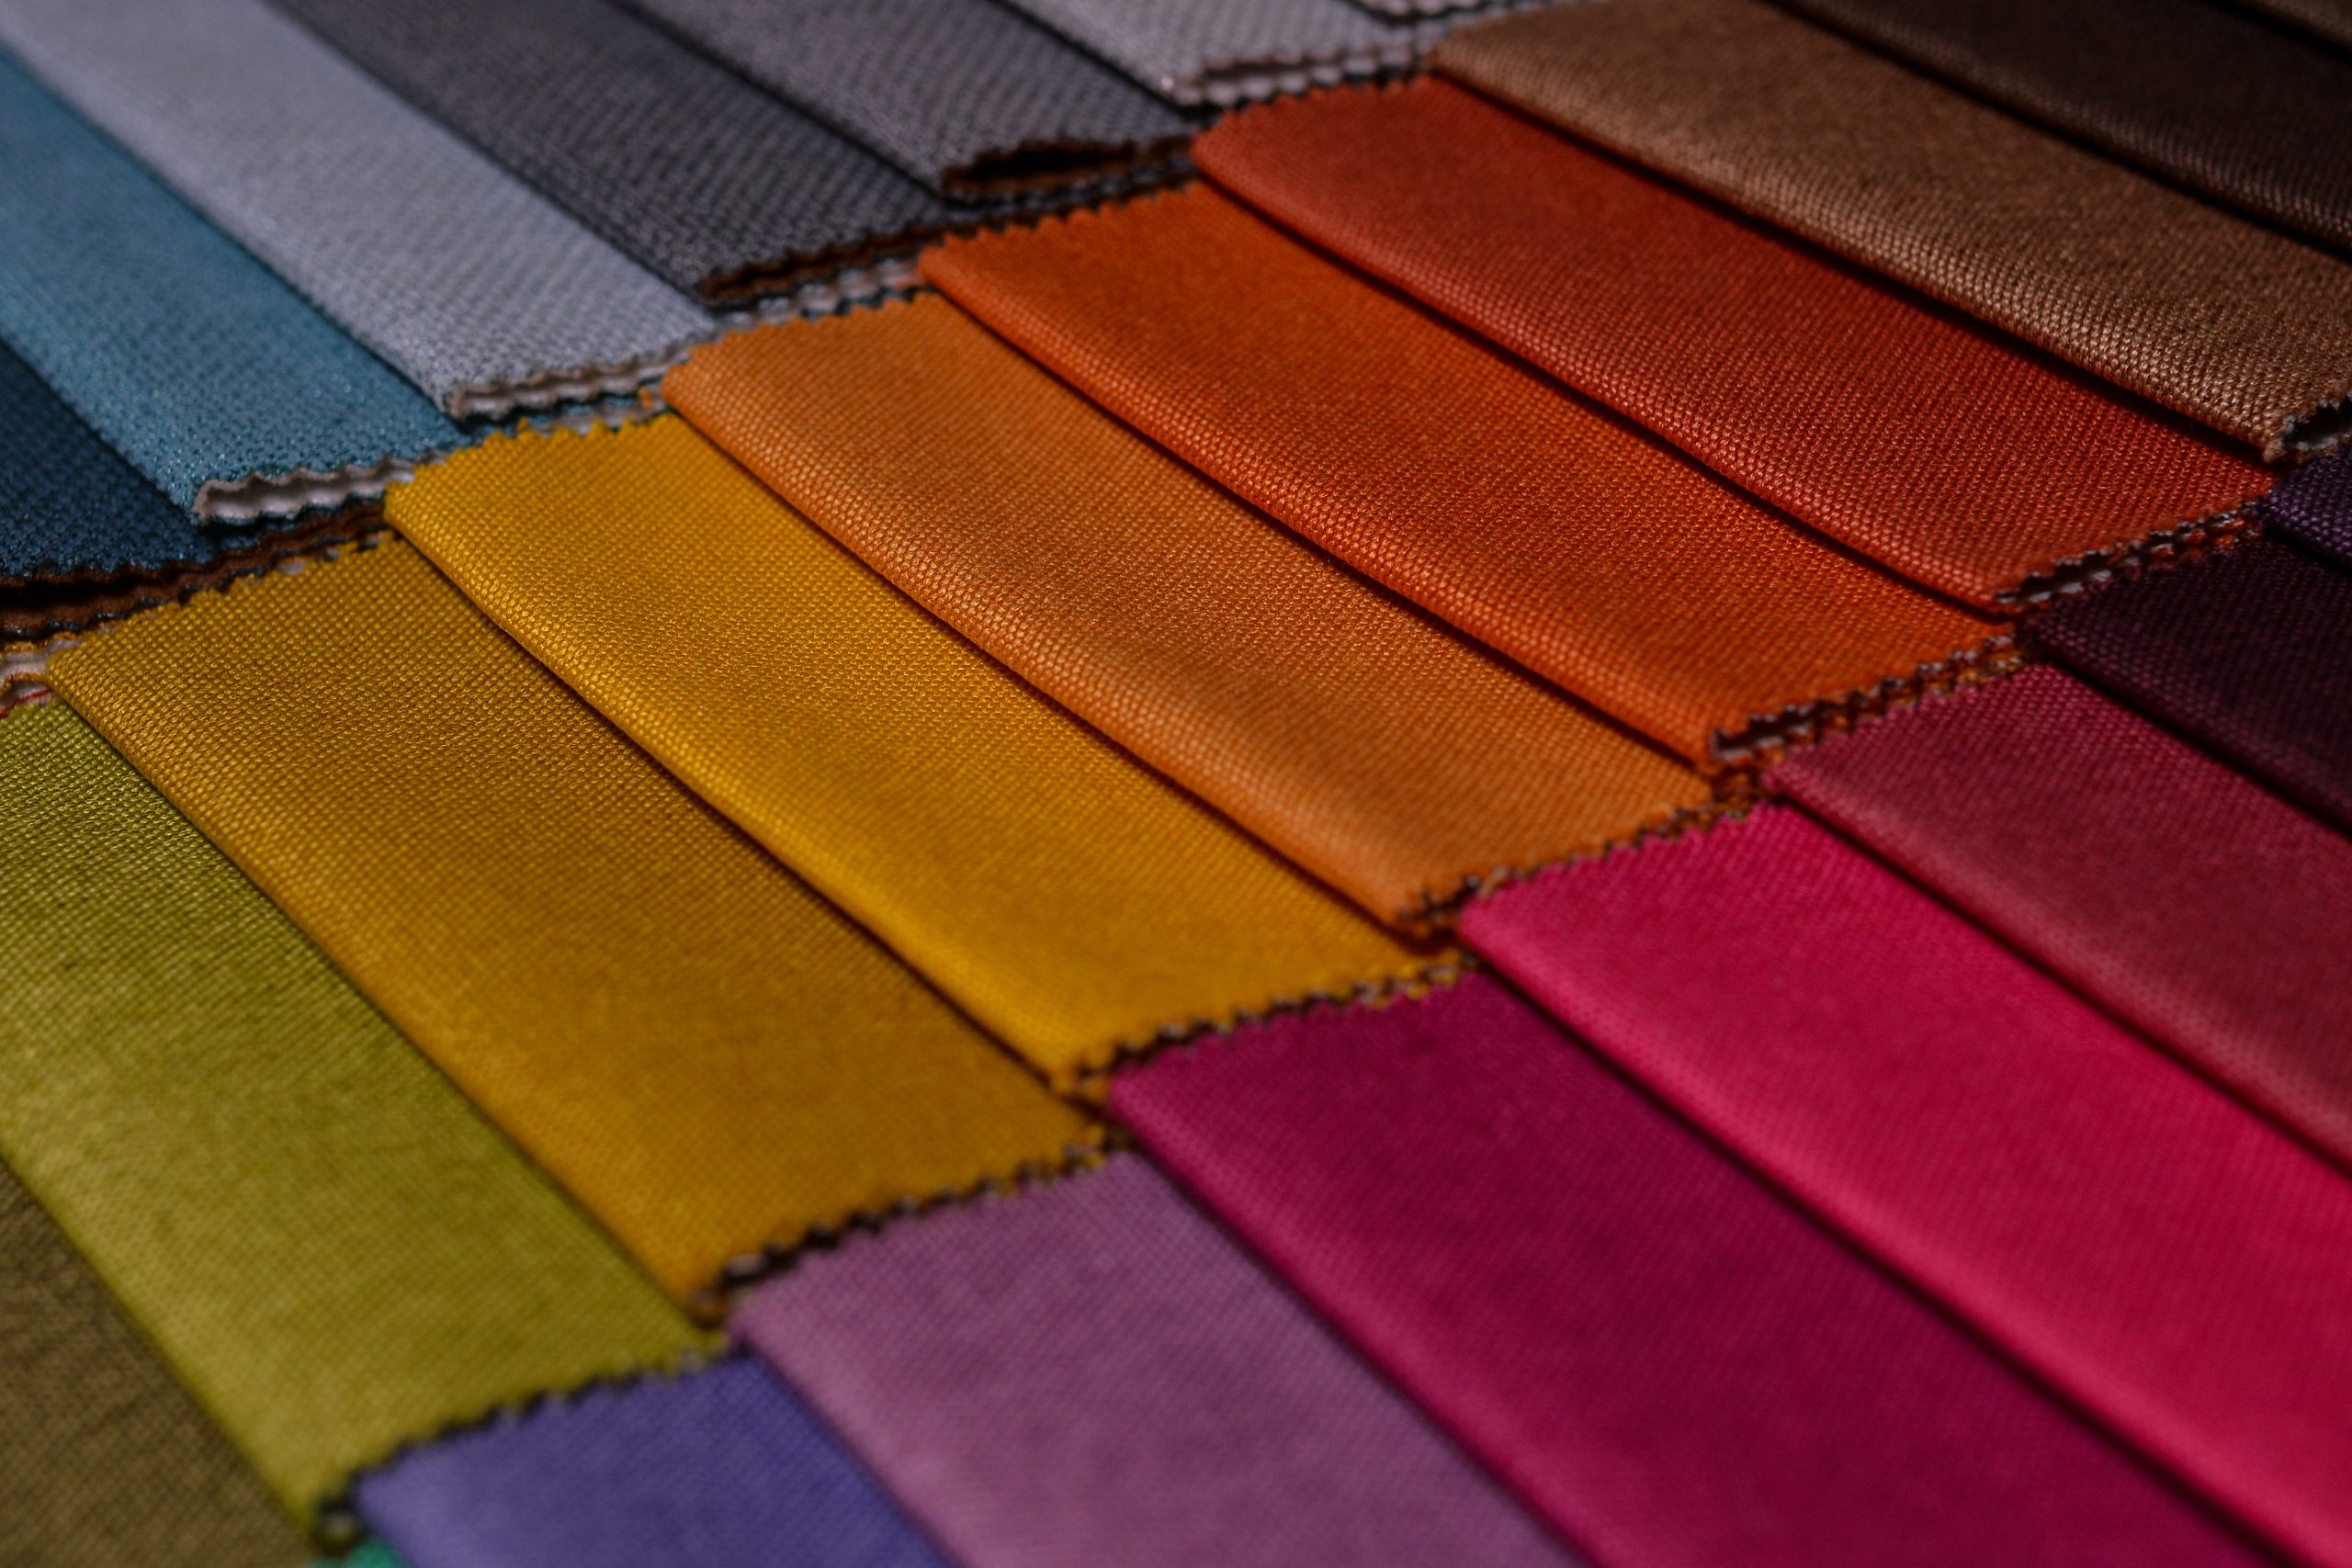 HMJ tech has dispensing solutions for the Upholstery & Fabric Coatings & Dyes Industry